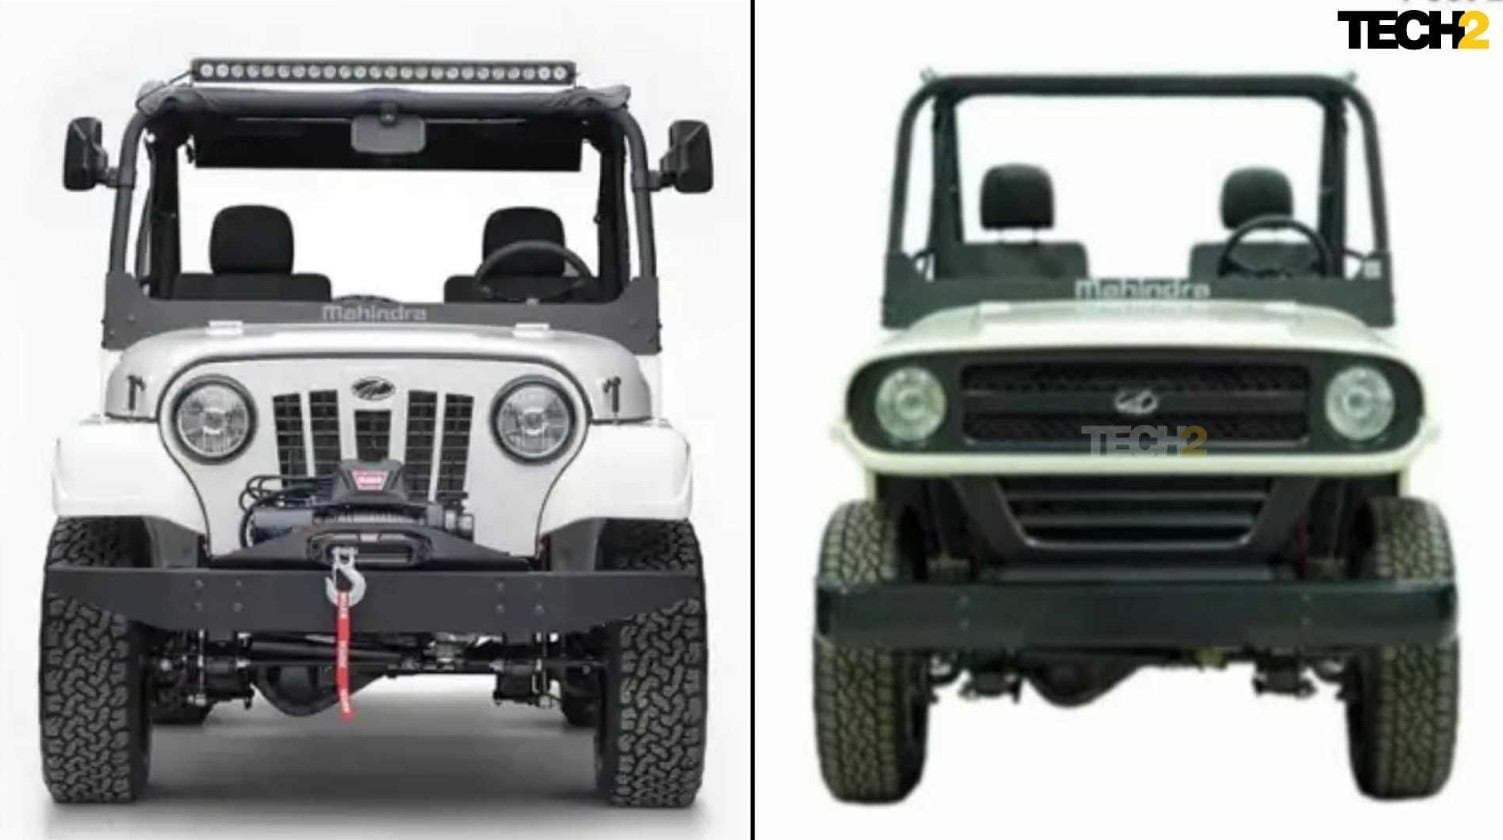 Then and now: Mahindra's Roxor underwent two significant redesigns between 2018 and 2020 after a heated legal battle with Jeep. Image: Tech2/Amaan Ahmed